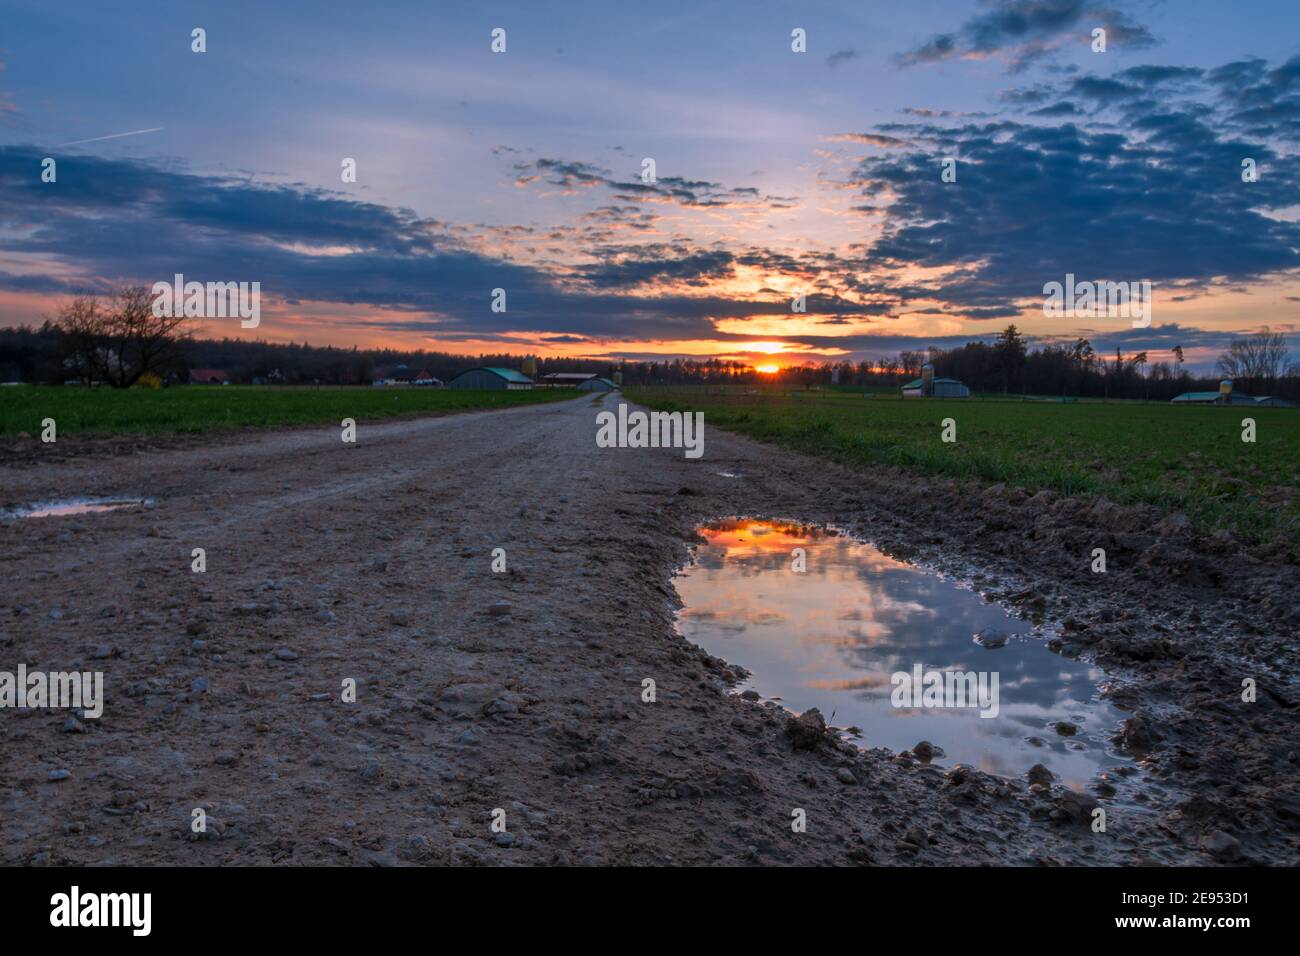 Sunset on the Swabian Alb in Germany Stock Photo